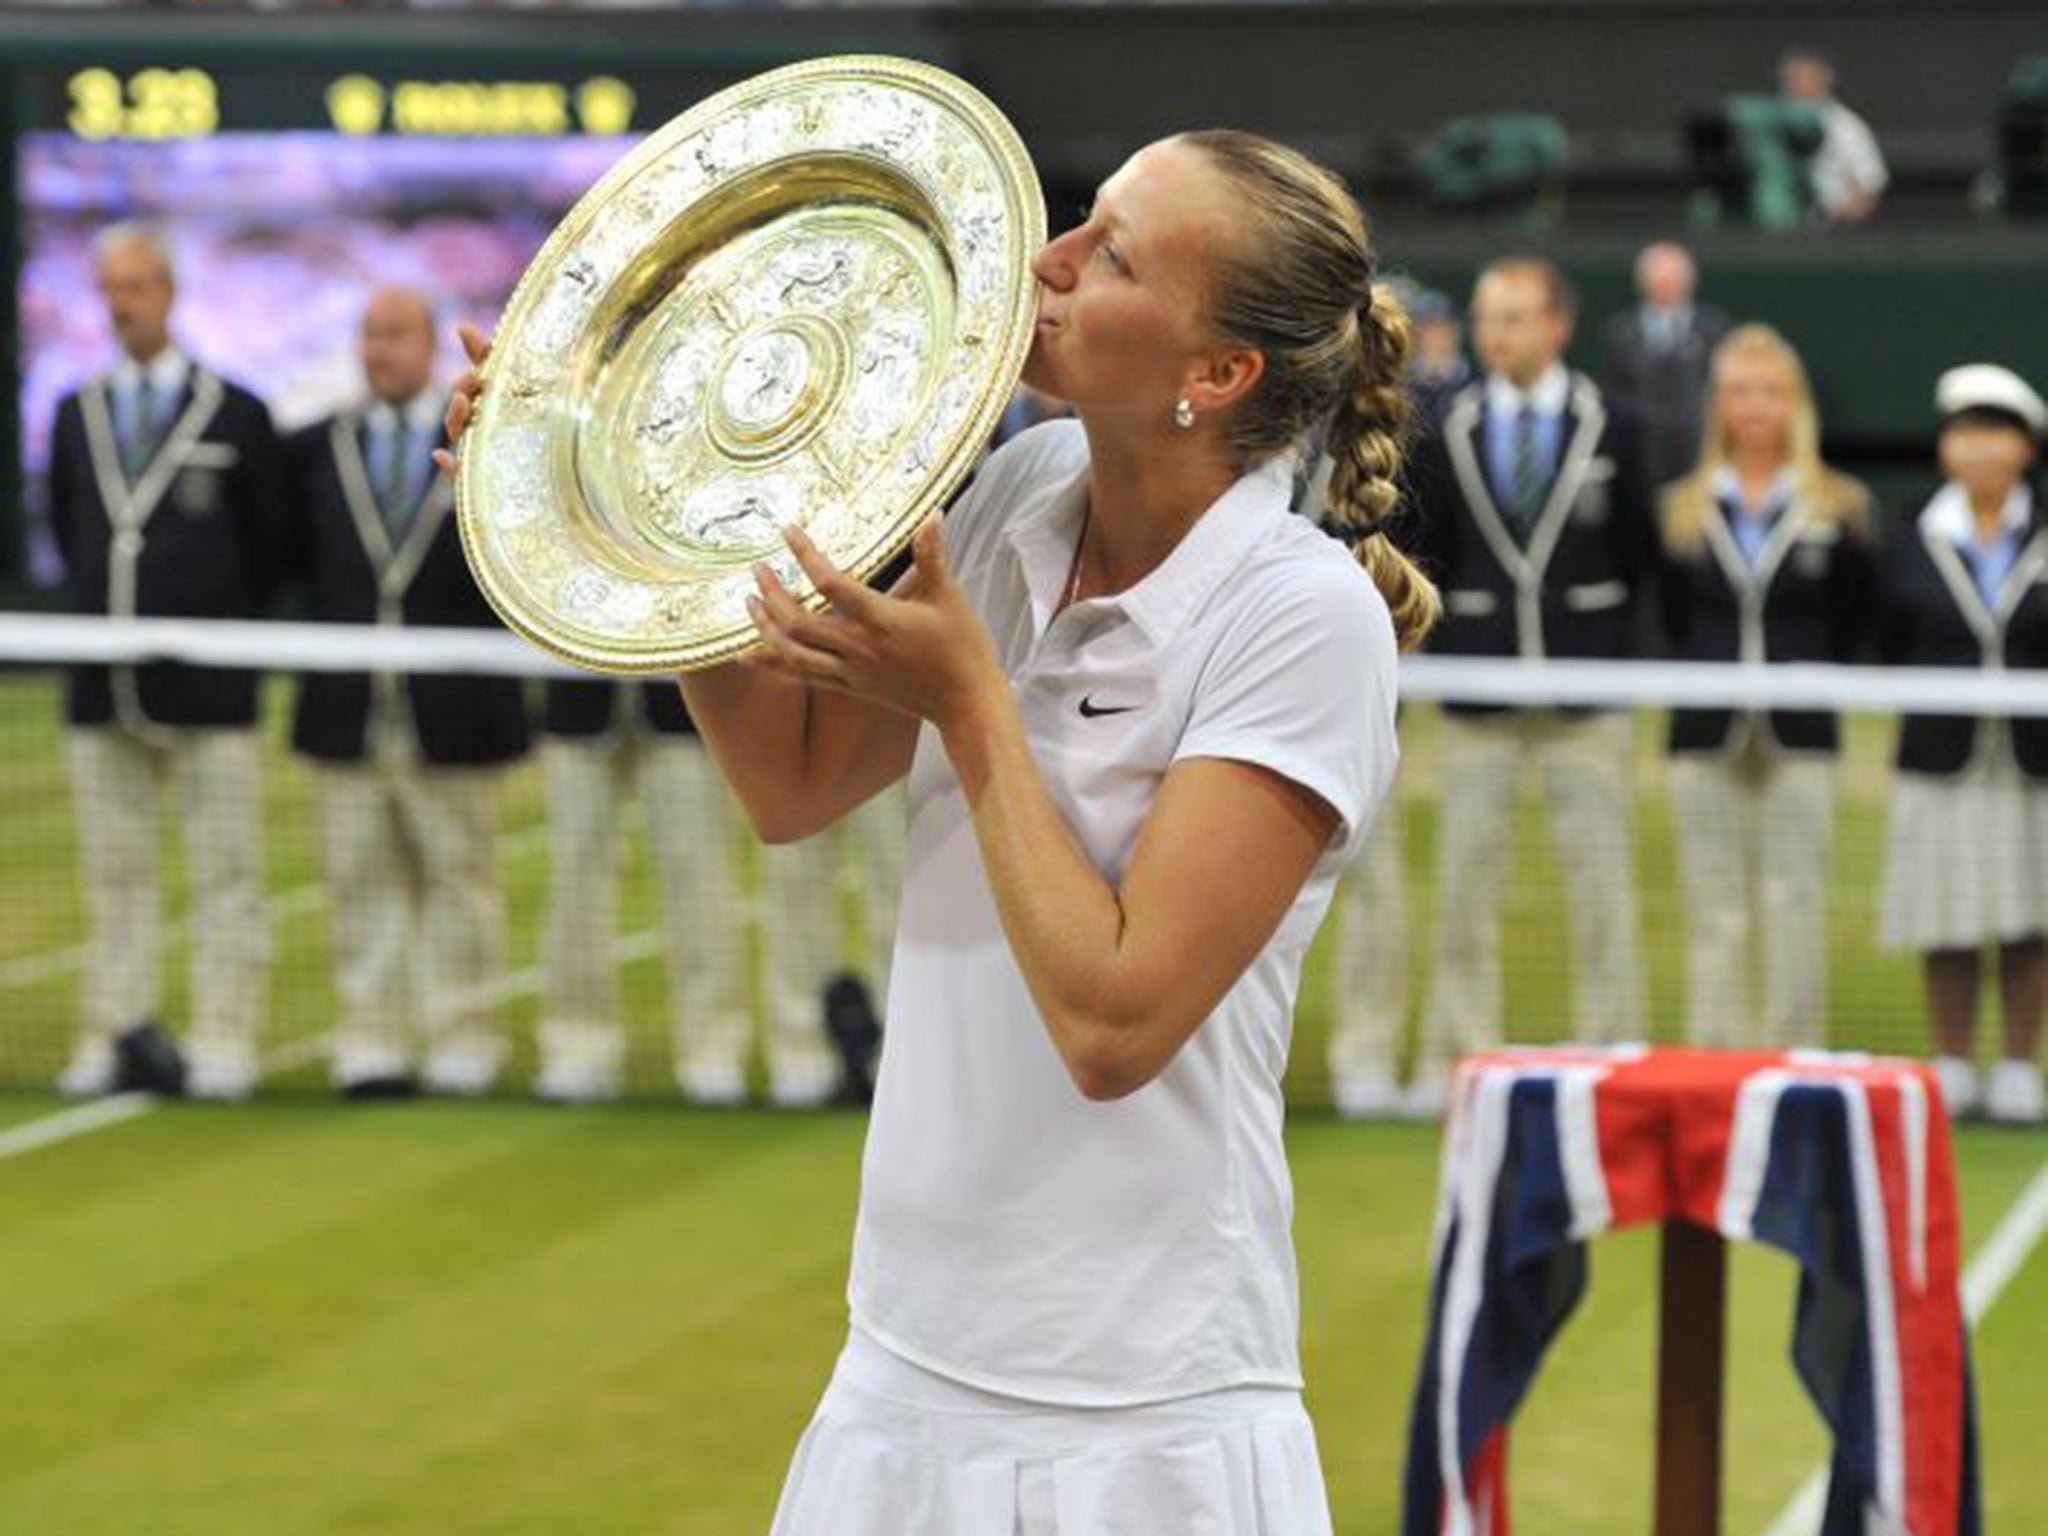 Petra Kvitova beat Eugenie Bouchard in under an hour in the final two years ago